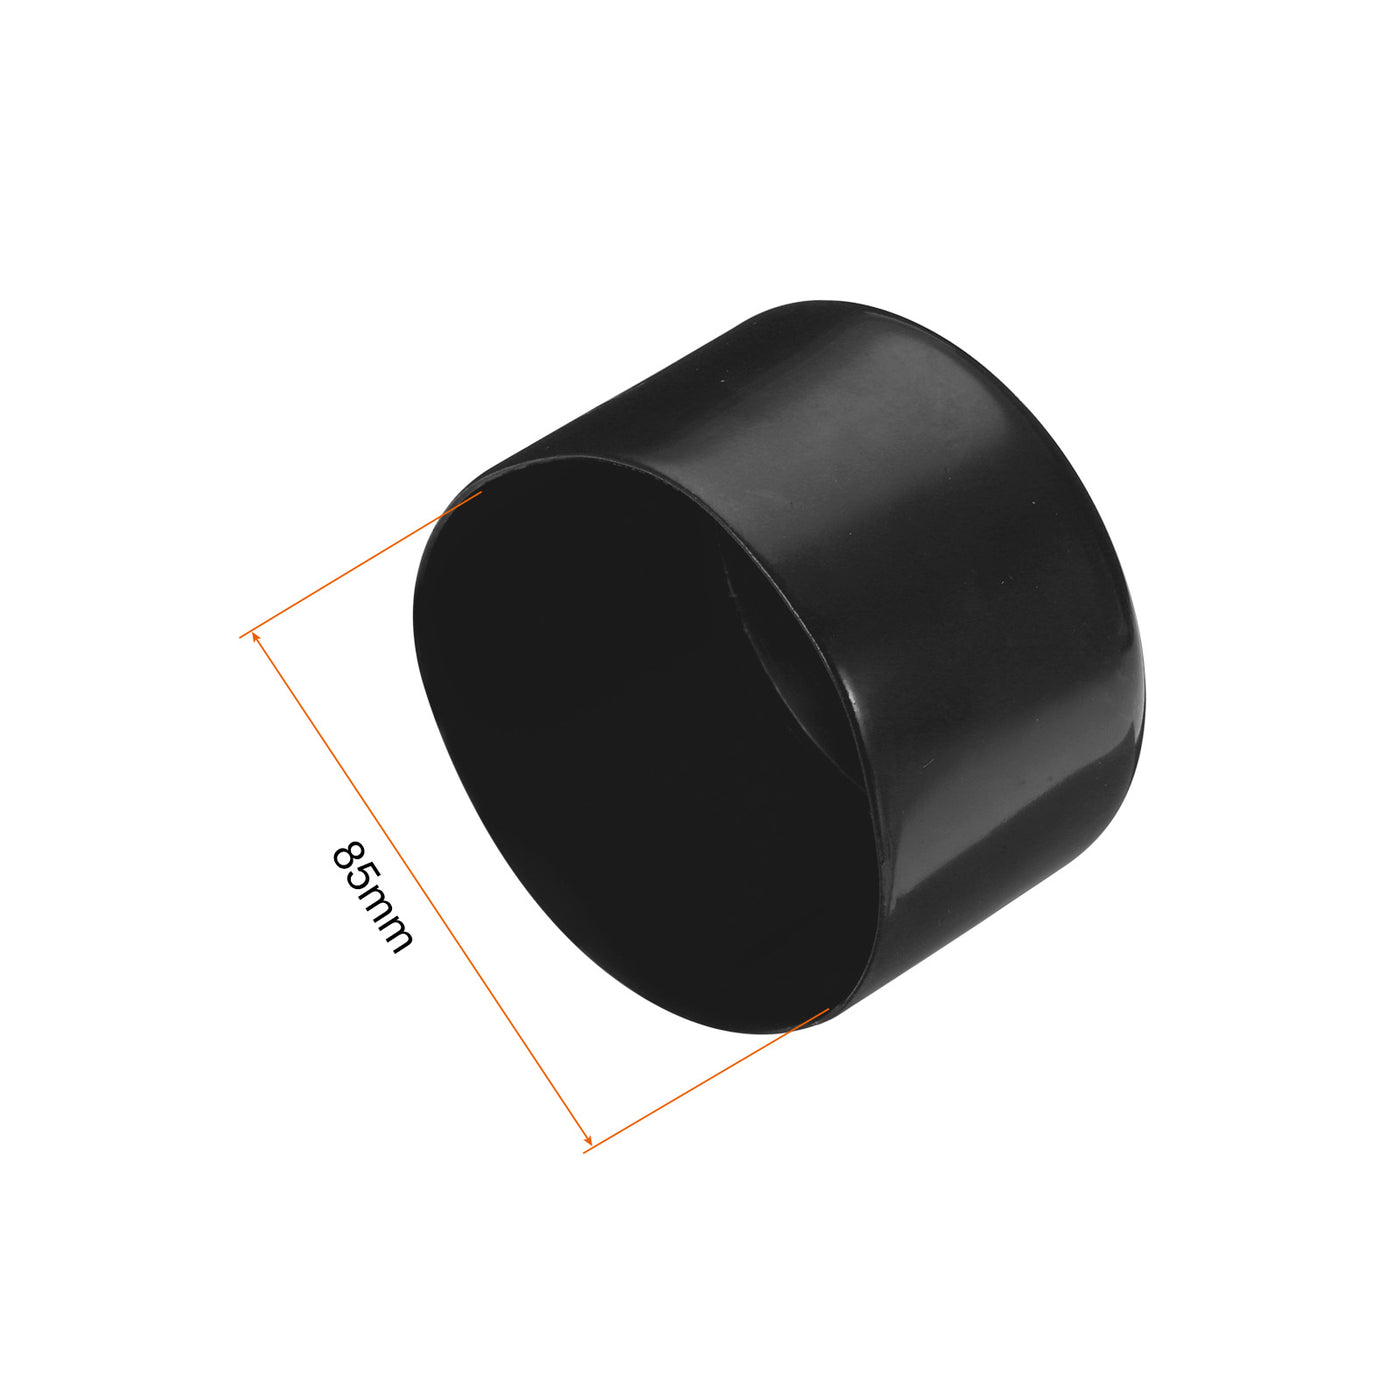 uxcell Uxcell Rubber End Caps 85mm ID Vinyl Round Tube Bolt Cap Cover Screw Thread Protectors Black